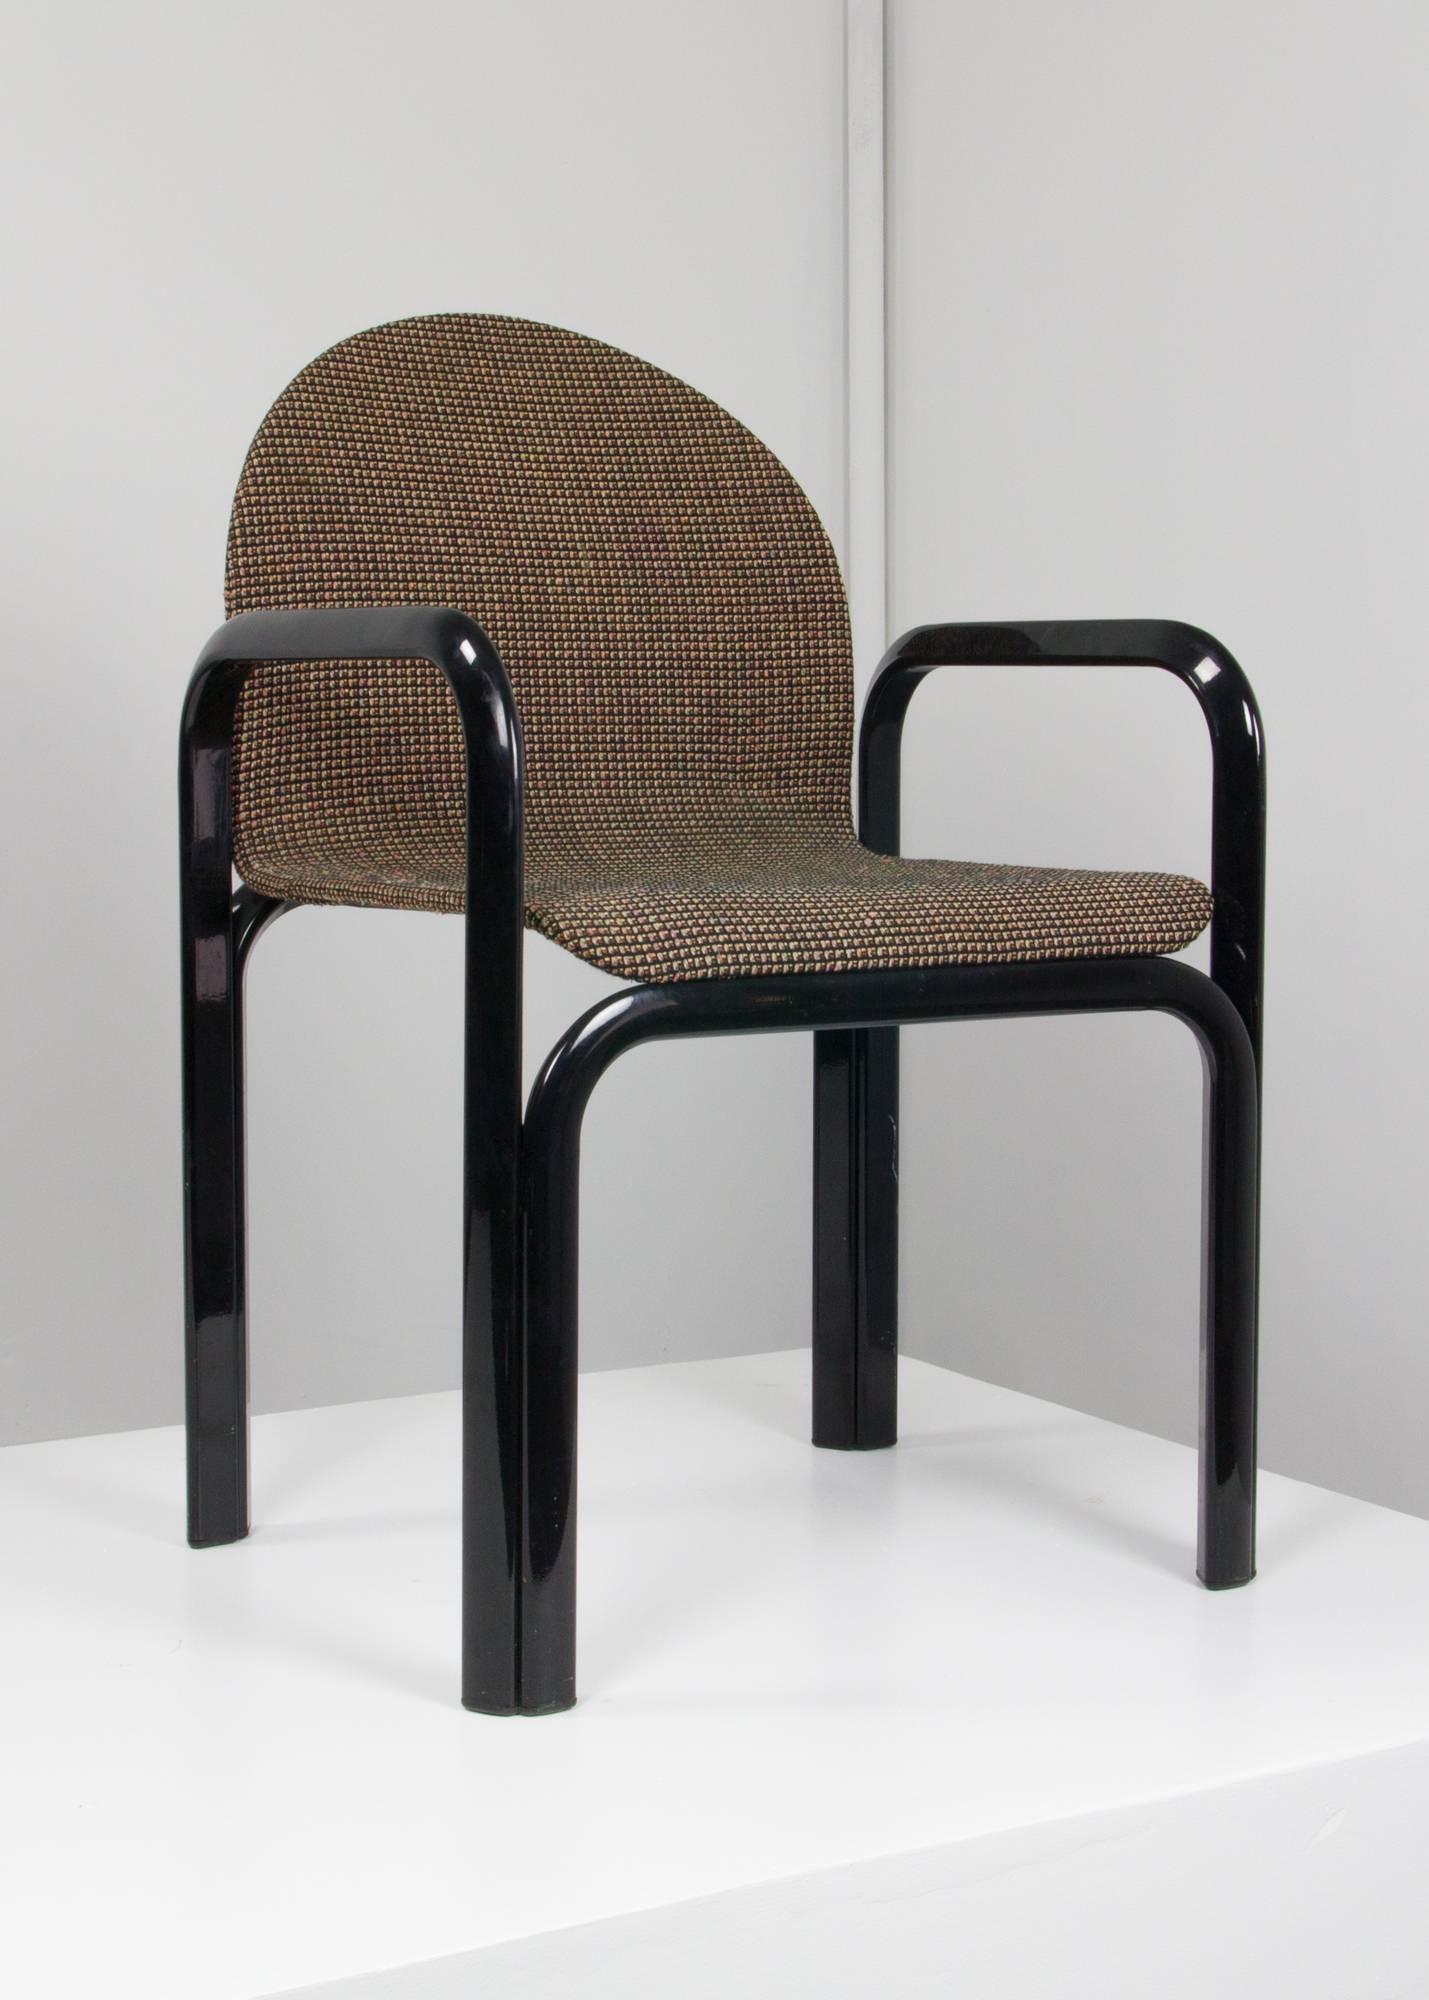 Set of 54A chairs by Gae Aulenti for Knoll with black lacquered steel frames and sinuous bent plywood seats in original fabric upholstery.